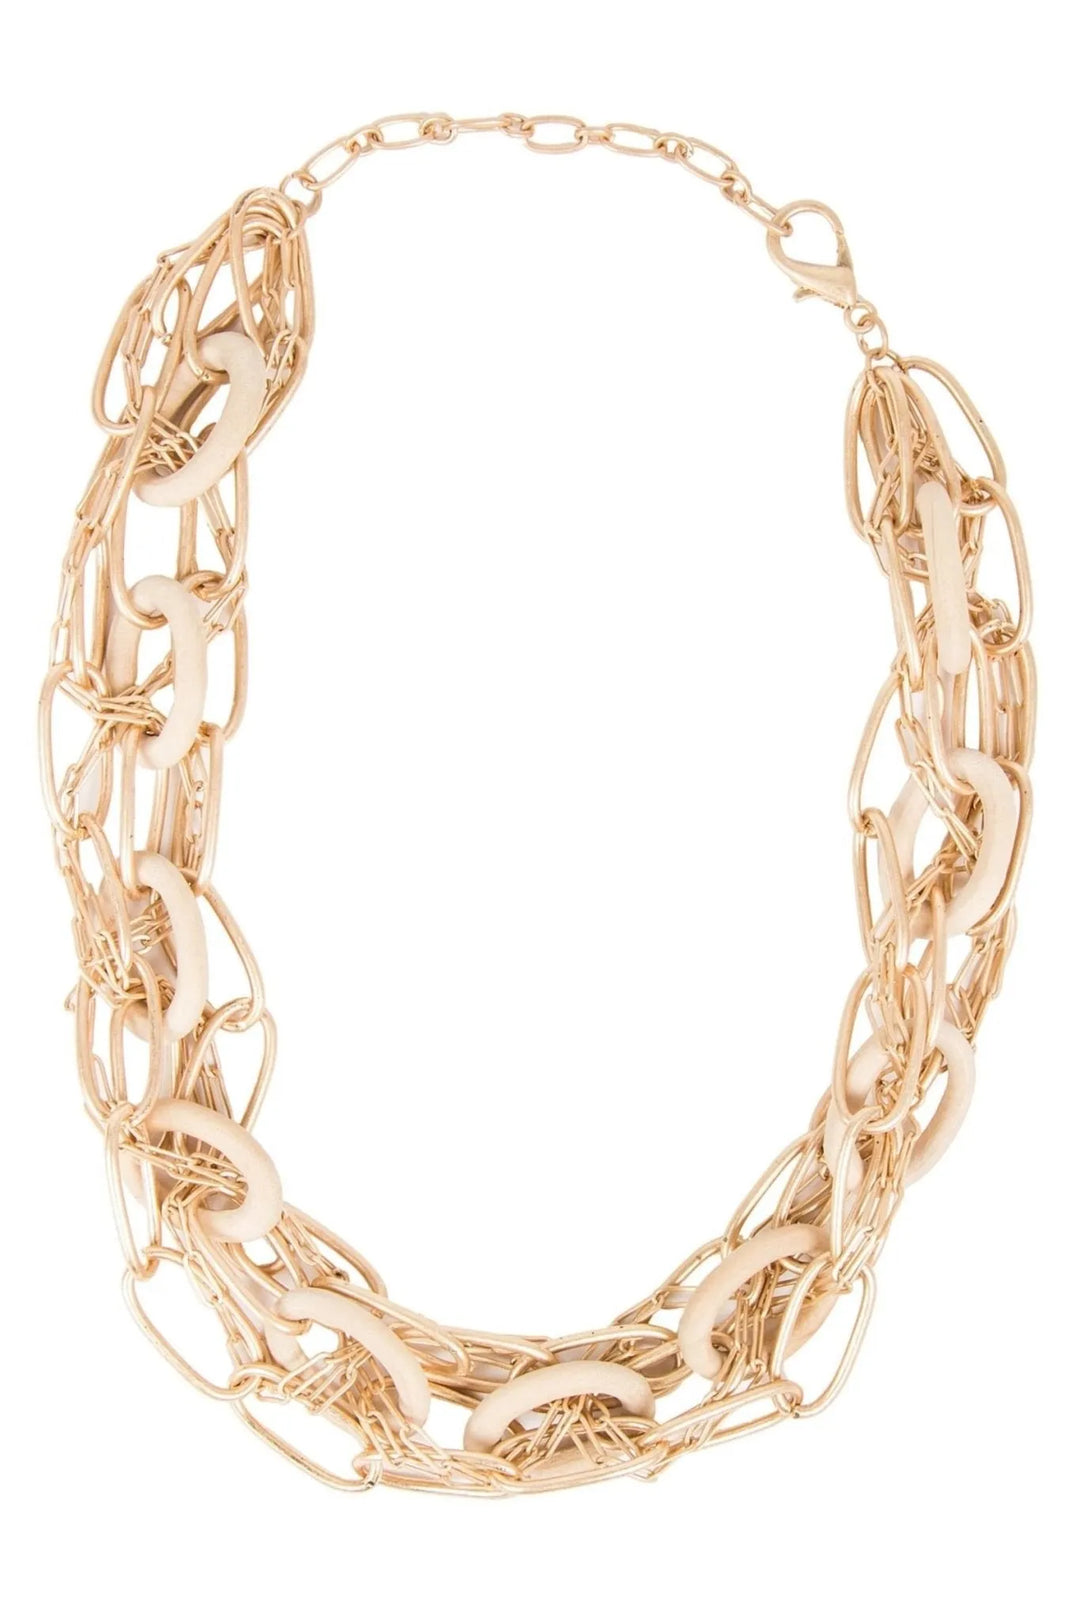 Nava Gold Necklace Gold